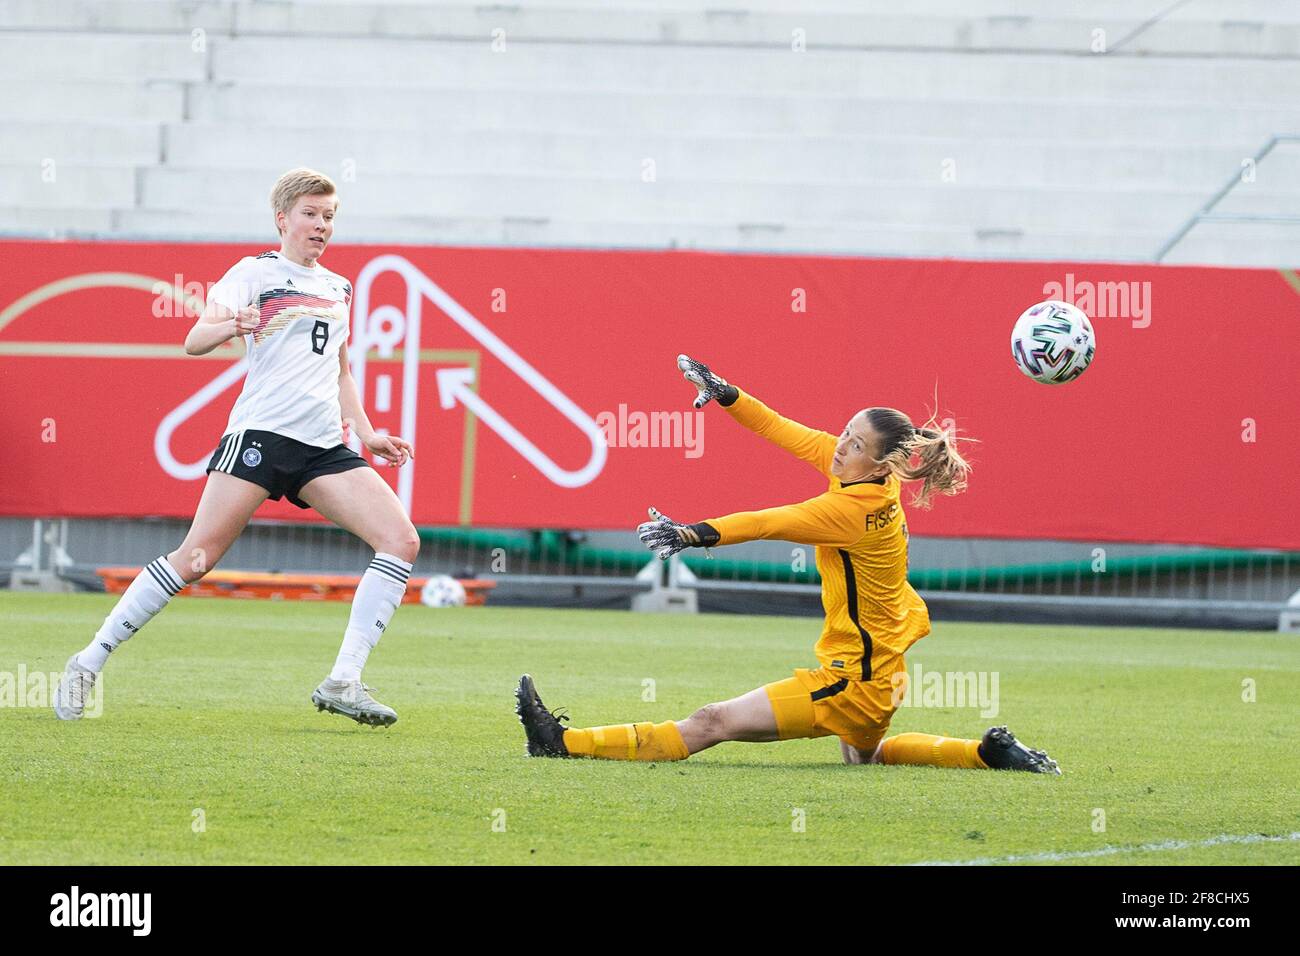 13 April 2021, Hessen, Wiesbaden: Football, Women: Internationals, Germany - Norway. Germany's Paulina Krumbiegel (l) scores the goal for 3:1 against Norway's goalkeeper Cecilie Fiskerstrand. Photo: Sebastian Gollnow/dpa Stock Photo